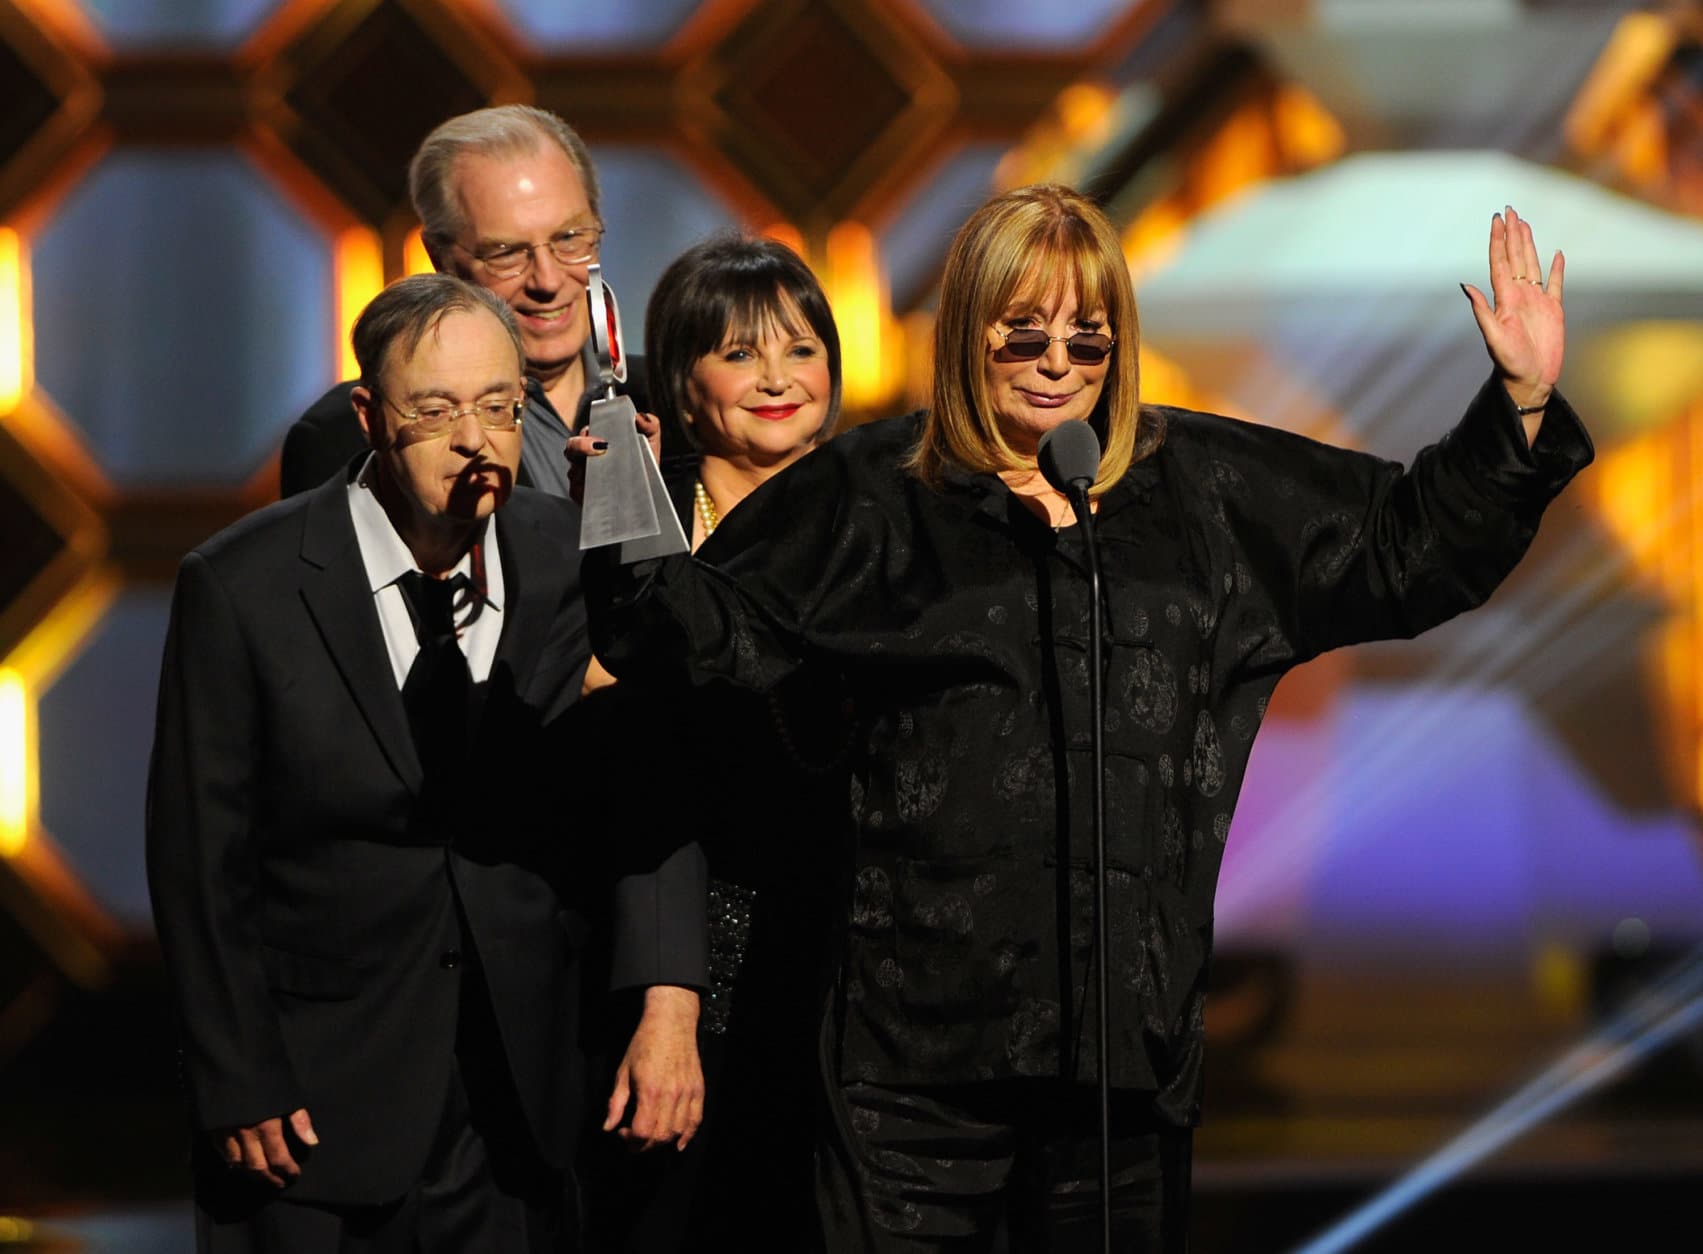 NEW YORK, NY - APRIL 14:  (L-R) Actors David L. Lander, Michael McKean, Cindy Williams and Penny Marshall speak onstage at the 10th Annual TV Land Awards at the Lexington Avenue Armory on April 14, 2012 in New York City.  (Photo by Andrew H. Walker/Getty Images)